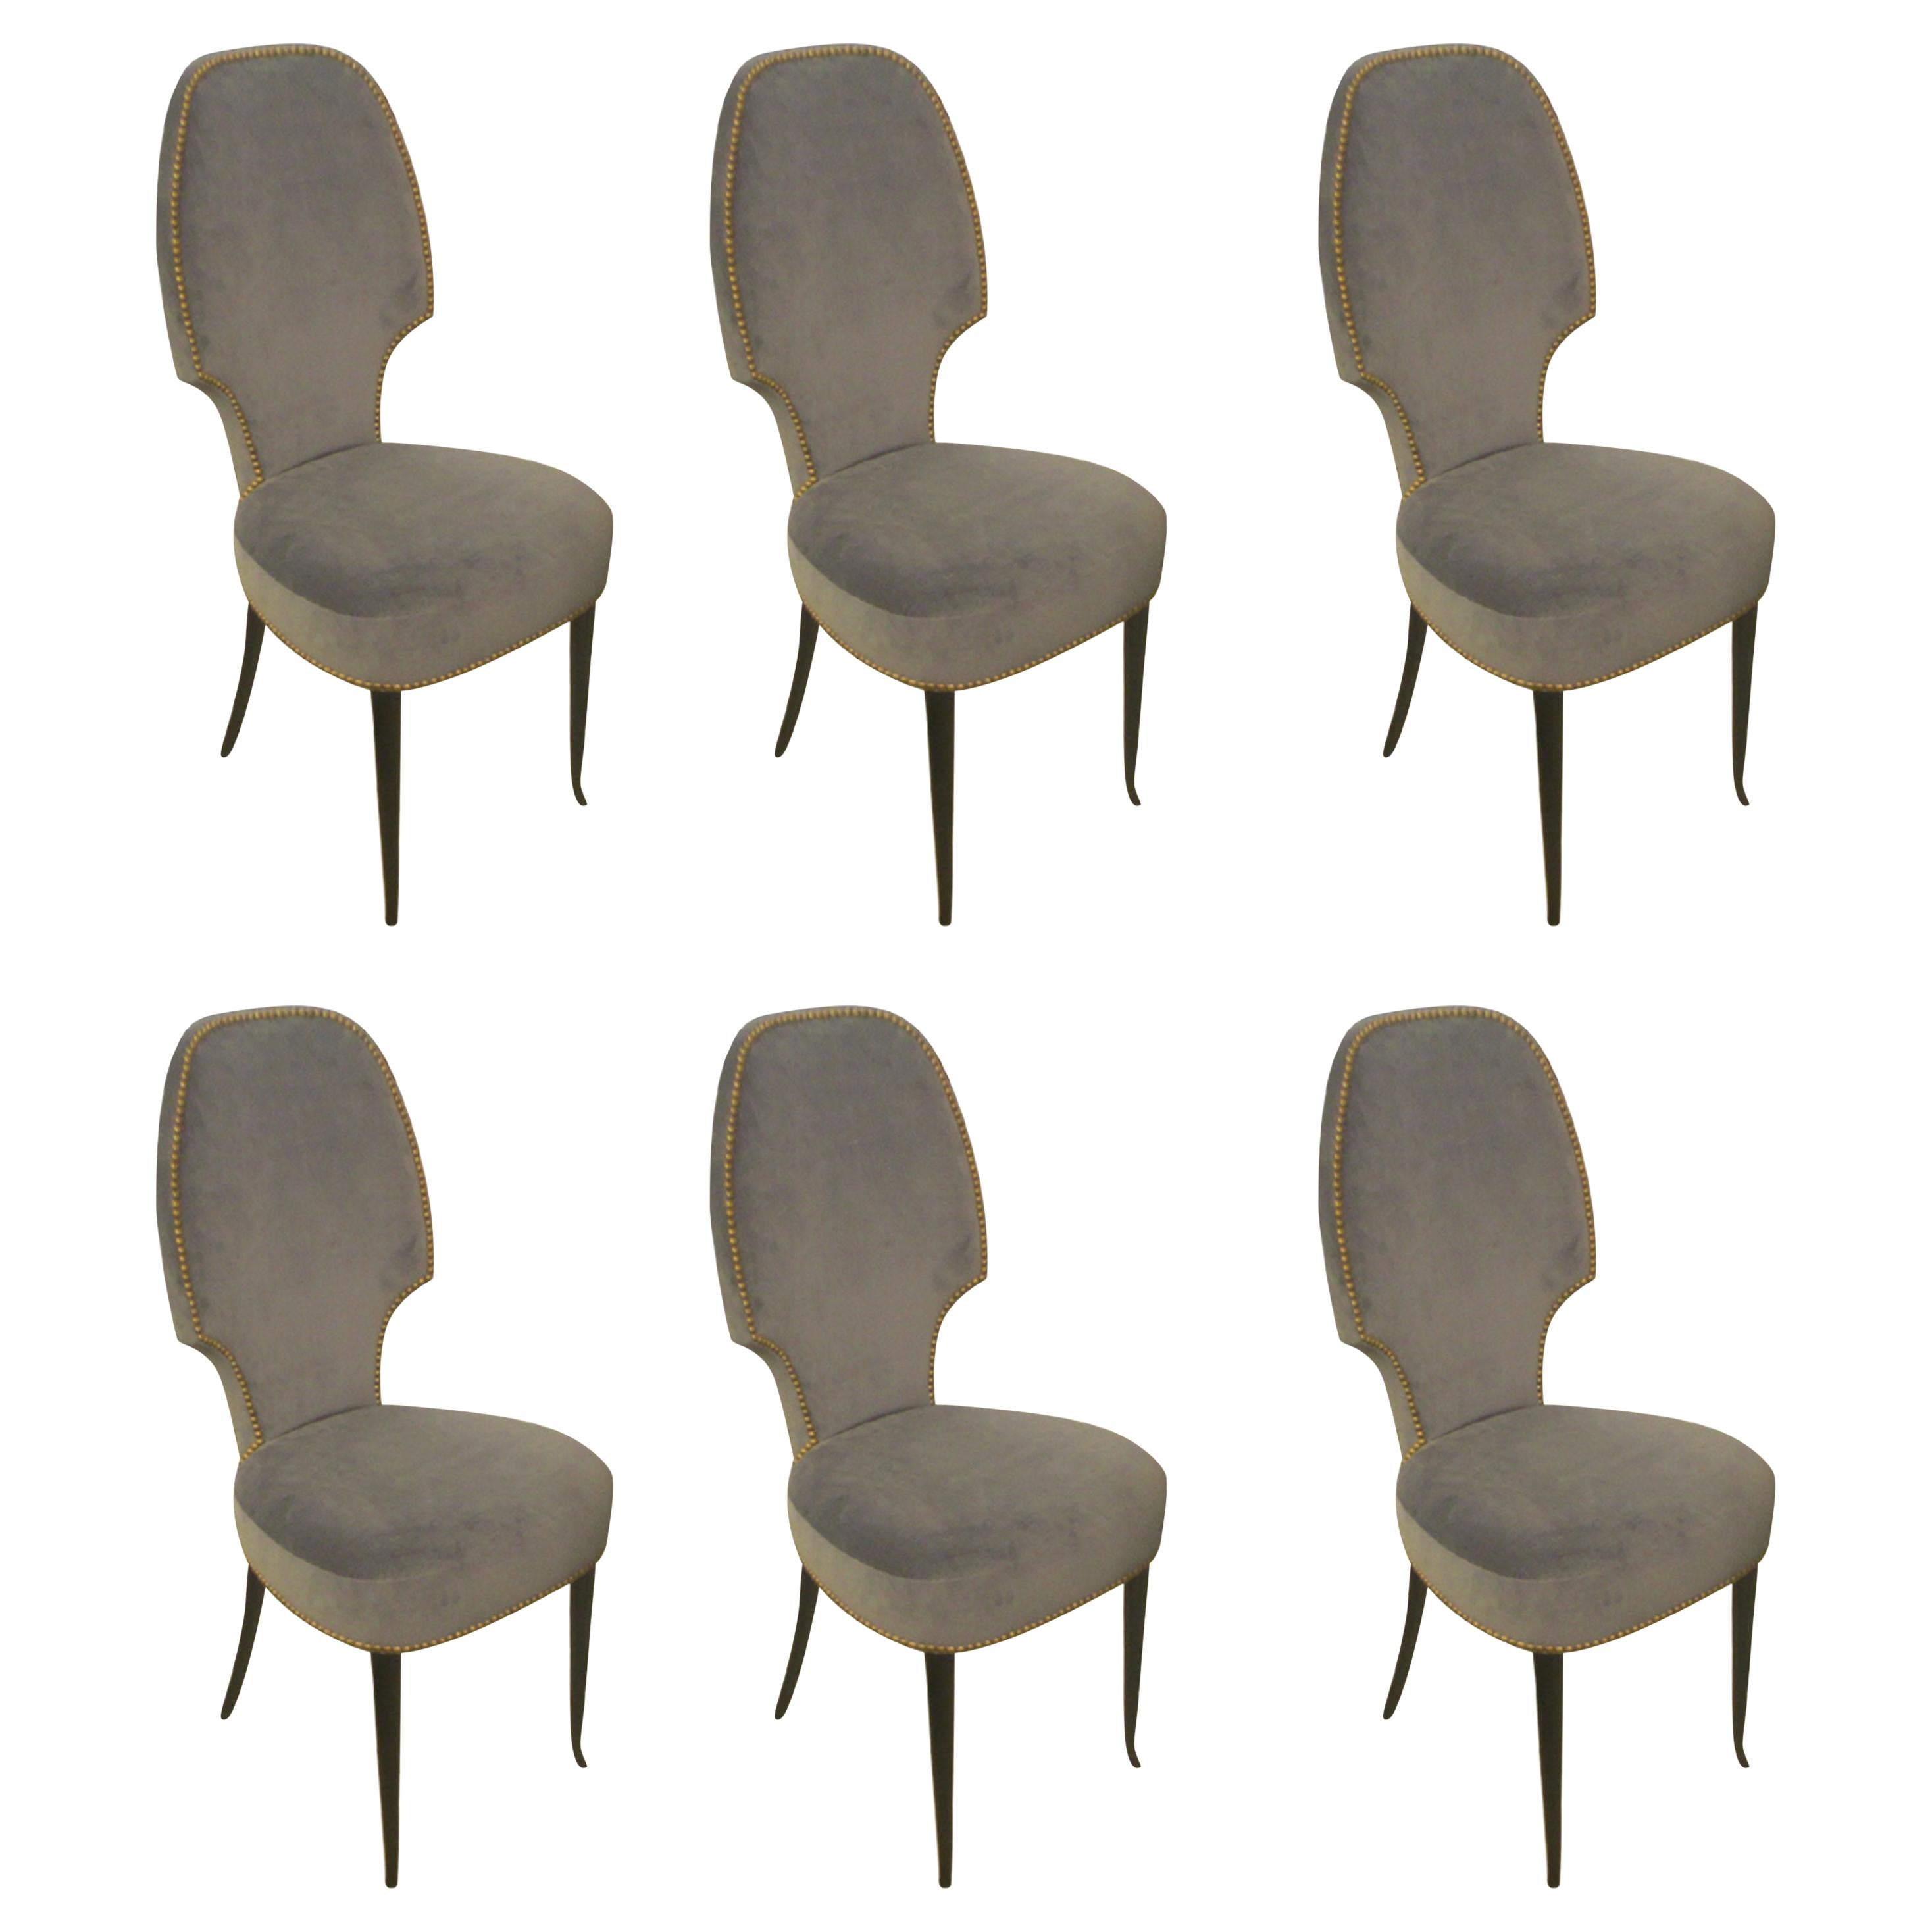 Set of Six Italian Midcentury Sculptural Dining Room Chairs